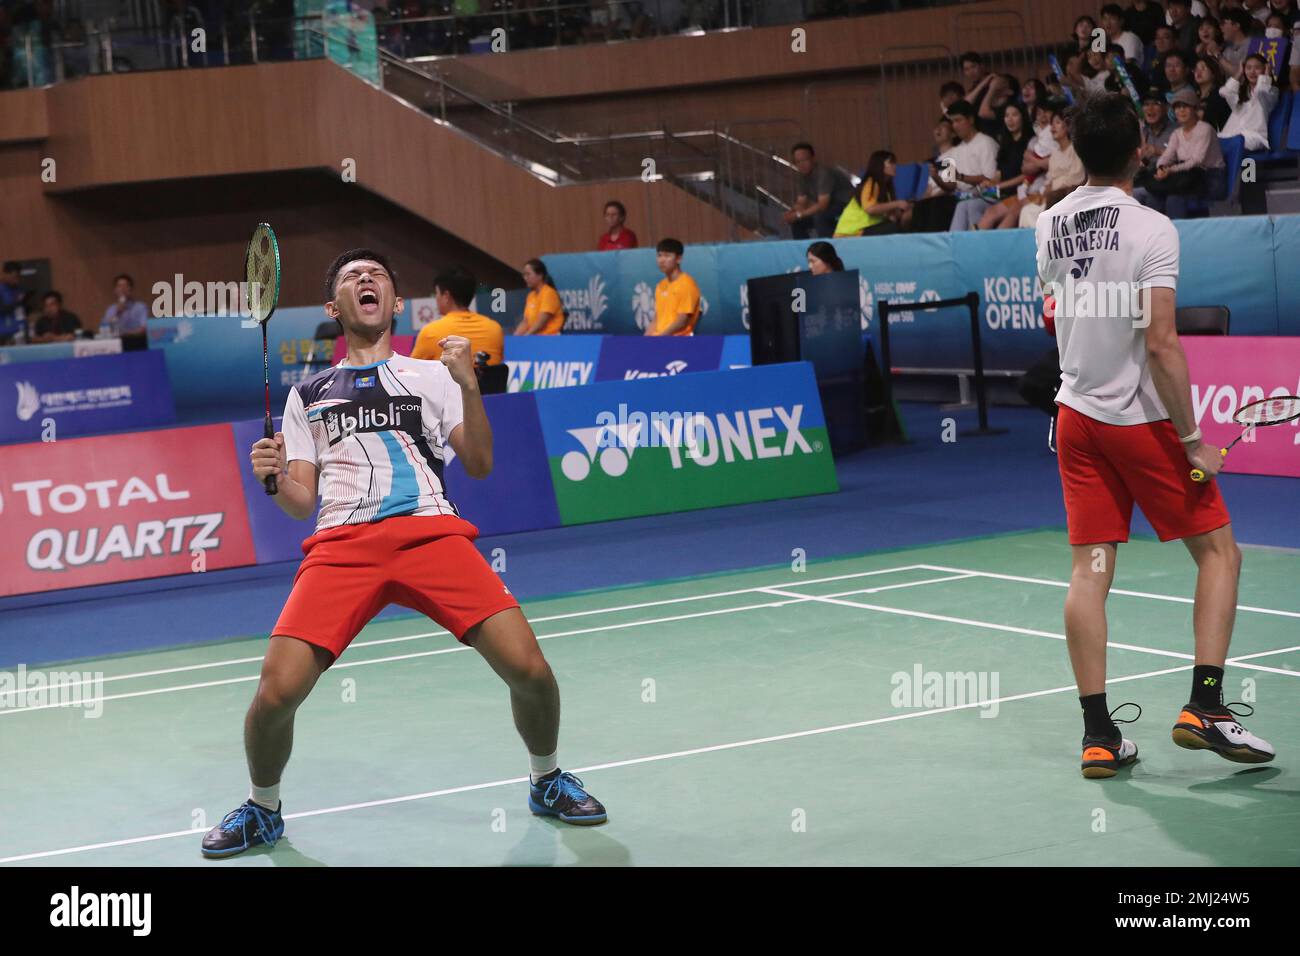 Indonesias Muhammad Fajar Alfian, left , and his teammate Rian Ardianto celebrate after winning against Chinas Li Jun Hui and Liu You Chen during the mens doubles semi-final match at the Korea